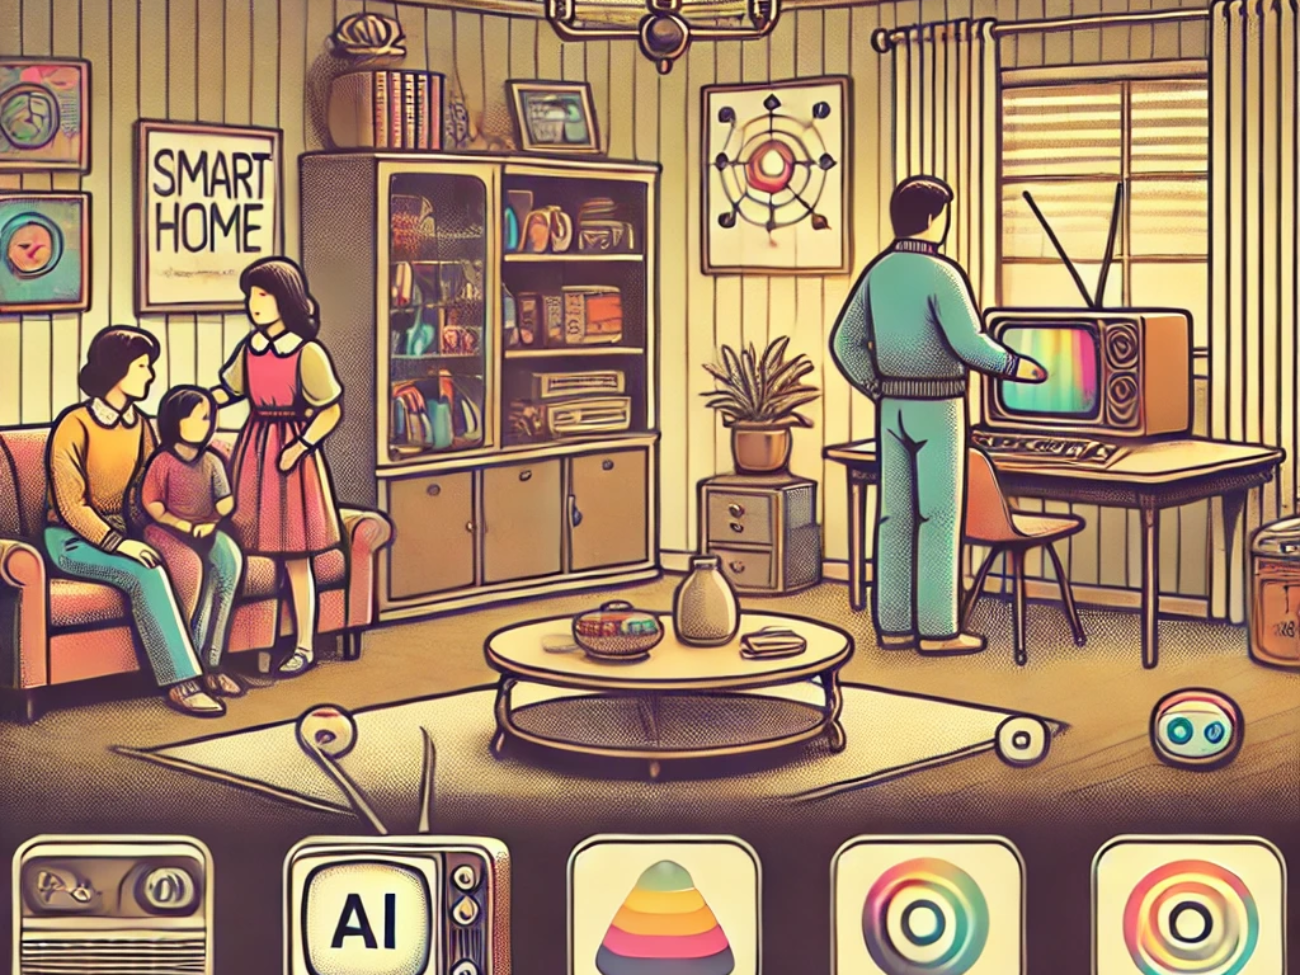 DALL·E 2024-06-27 11.18.05 - A 1980s-themed illustration of a smart home setup. The scene shows a family in a living room with vintage furniture, where AI-powered devices control